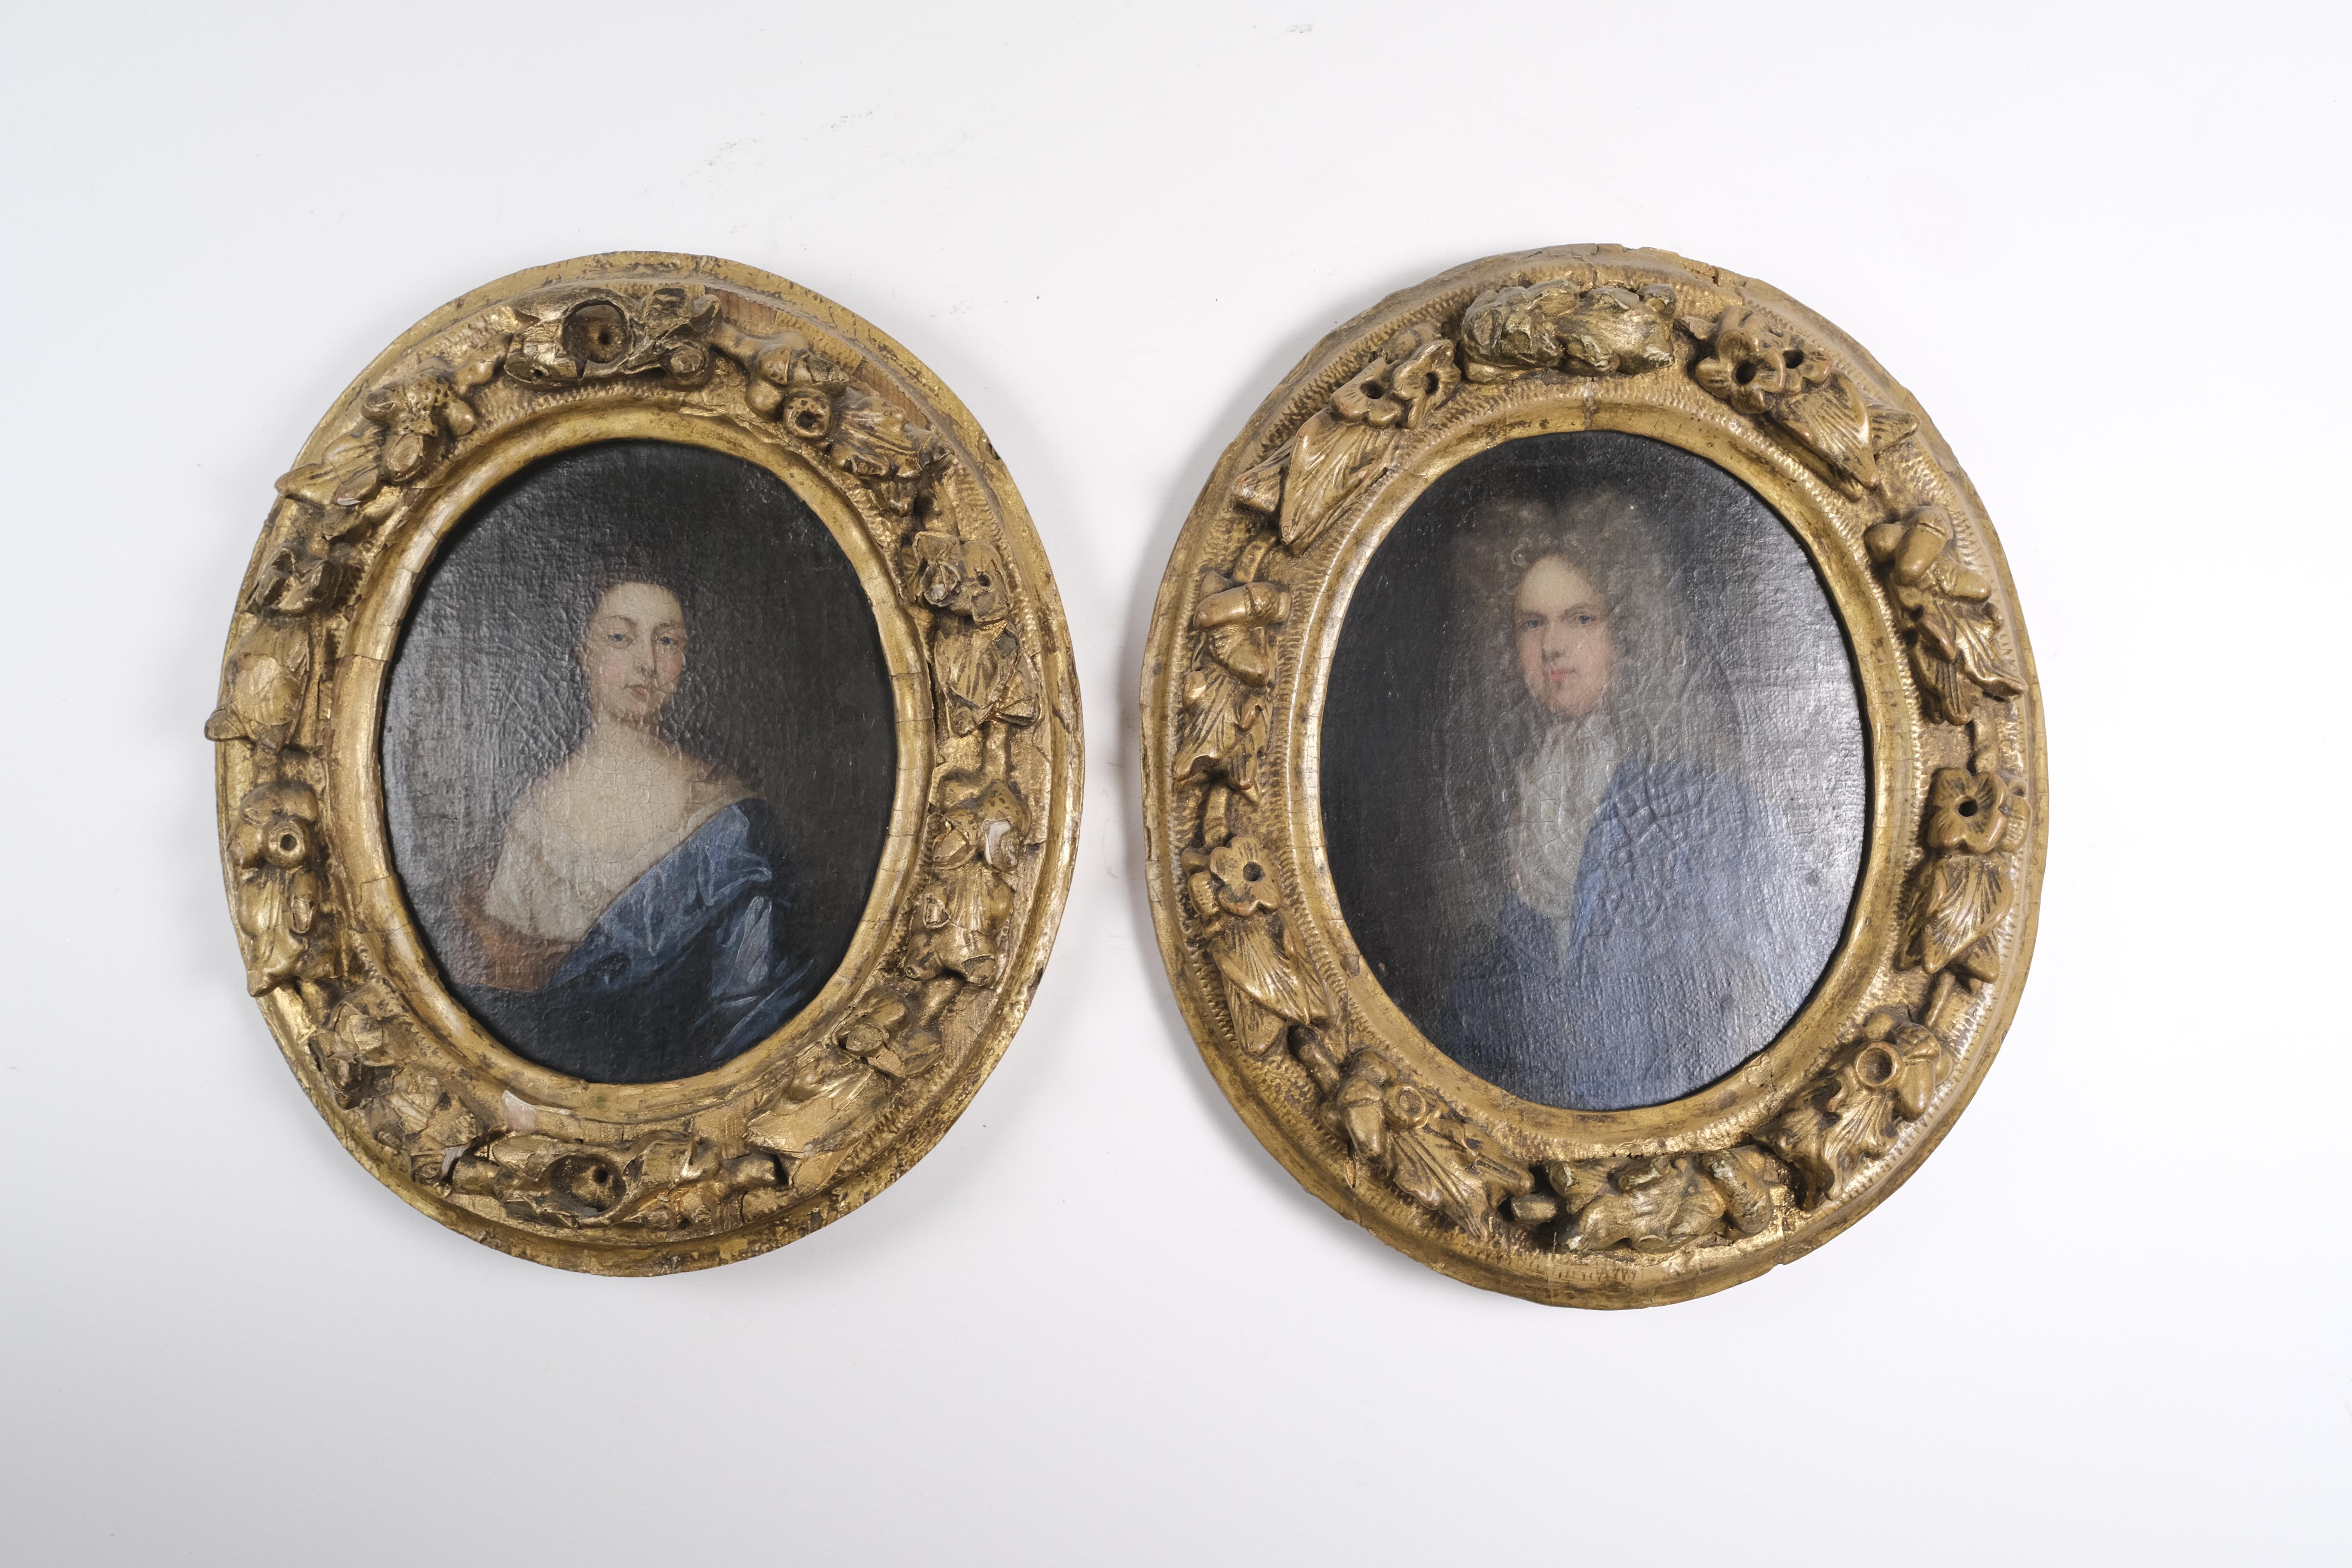 Miniature portraits of Ludwig I of Bavaria and his wife, Queen Theresa. Documented by Christies. Original giltwood oval frames.